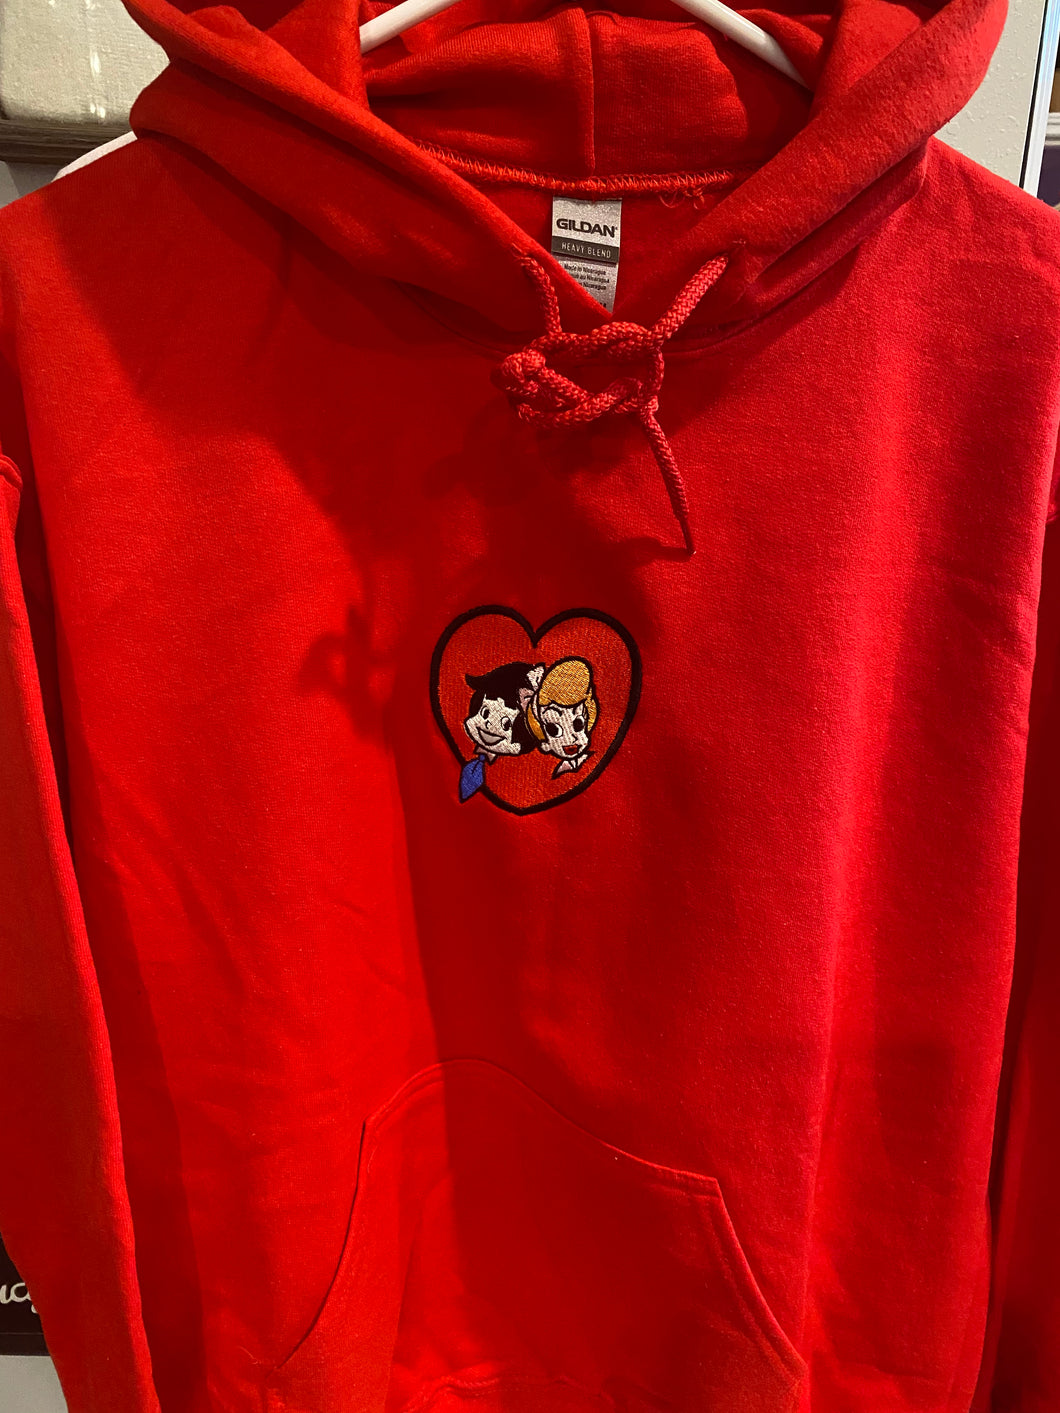 Lucy and Ricky in Heart Hoodie - Embroidered